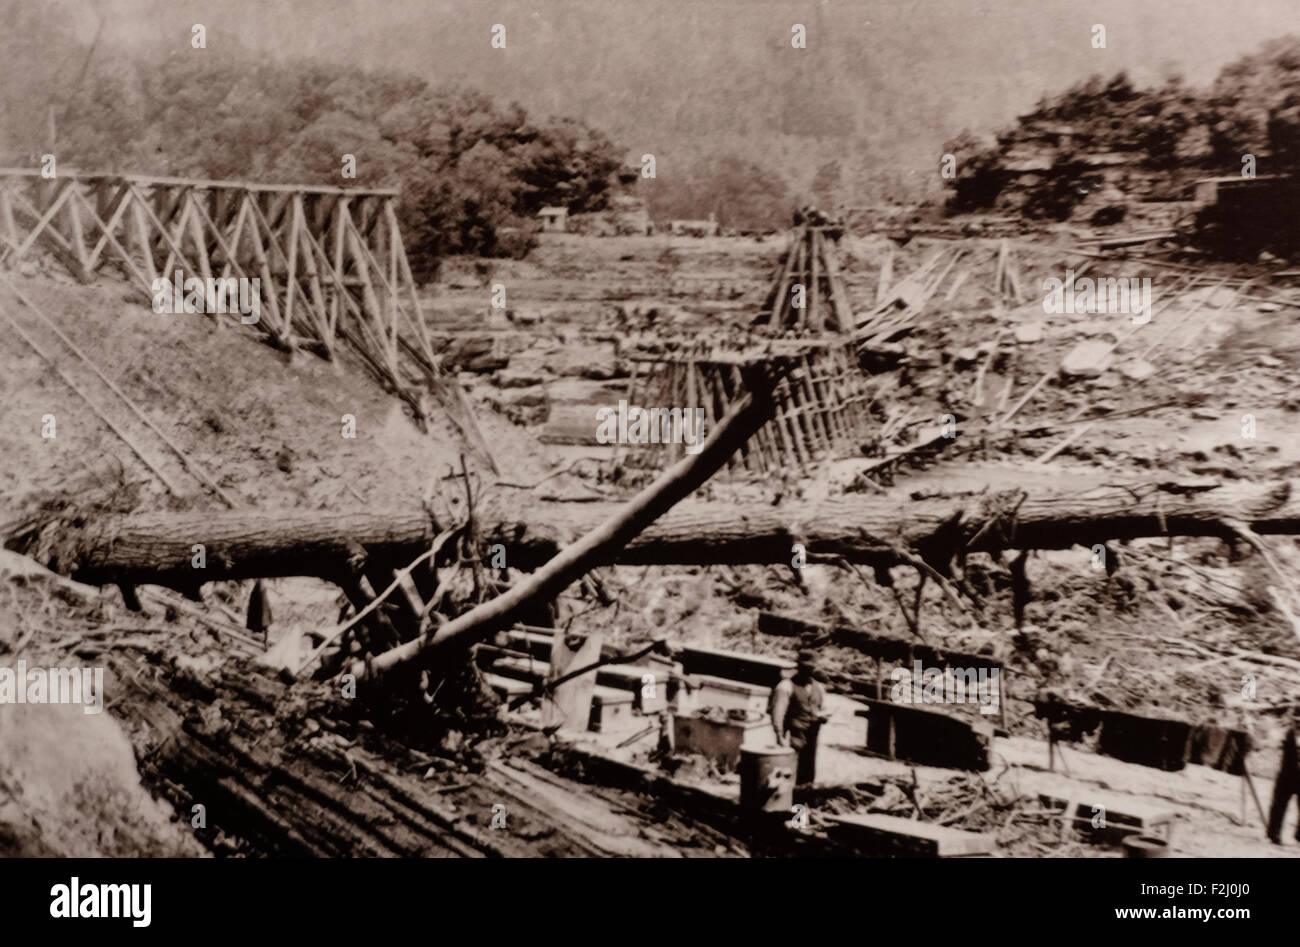 Progress in building Double Decked trestle - 80 feet high - total length 400 feet - constructed in 5 days after timber was received - Regular traffic resumed 14 days after the flood - June 14, 1889 Stock Photo